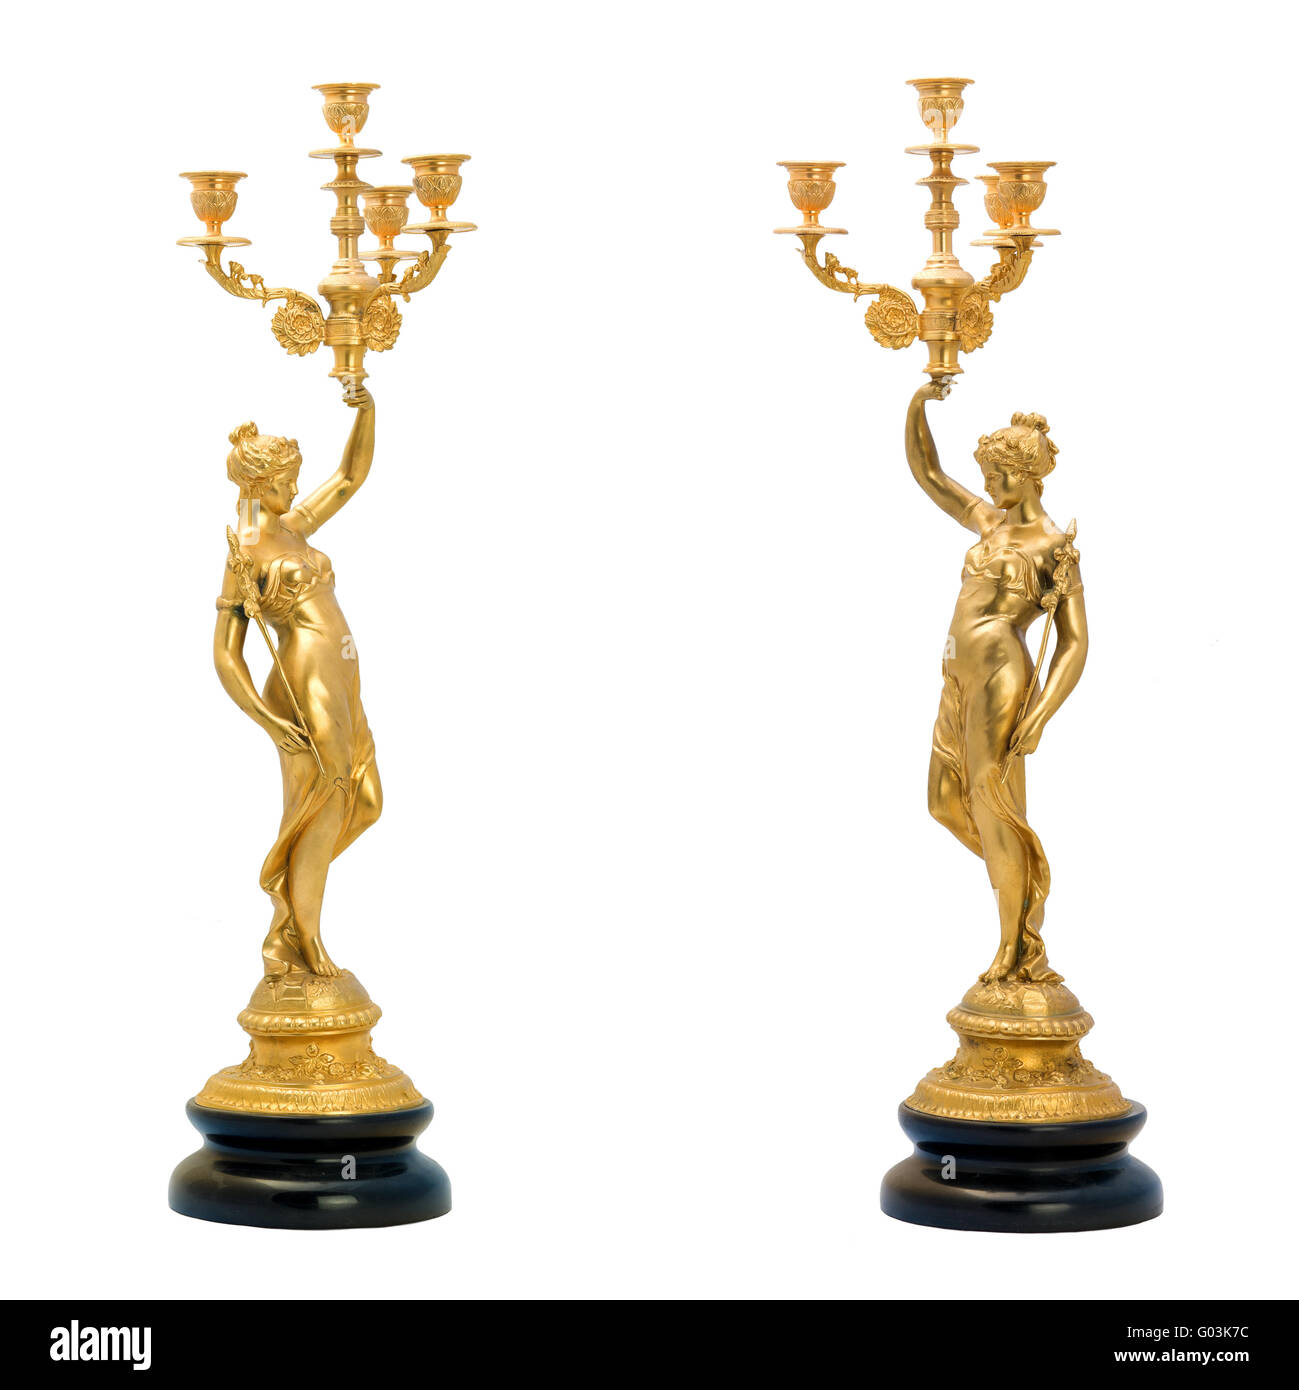 Two antique gold candlestick in the form of female figurines. Stock Photo